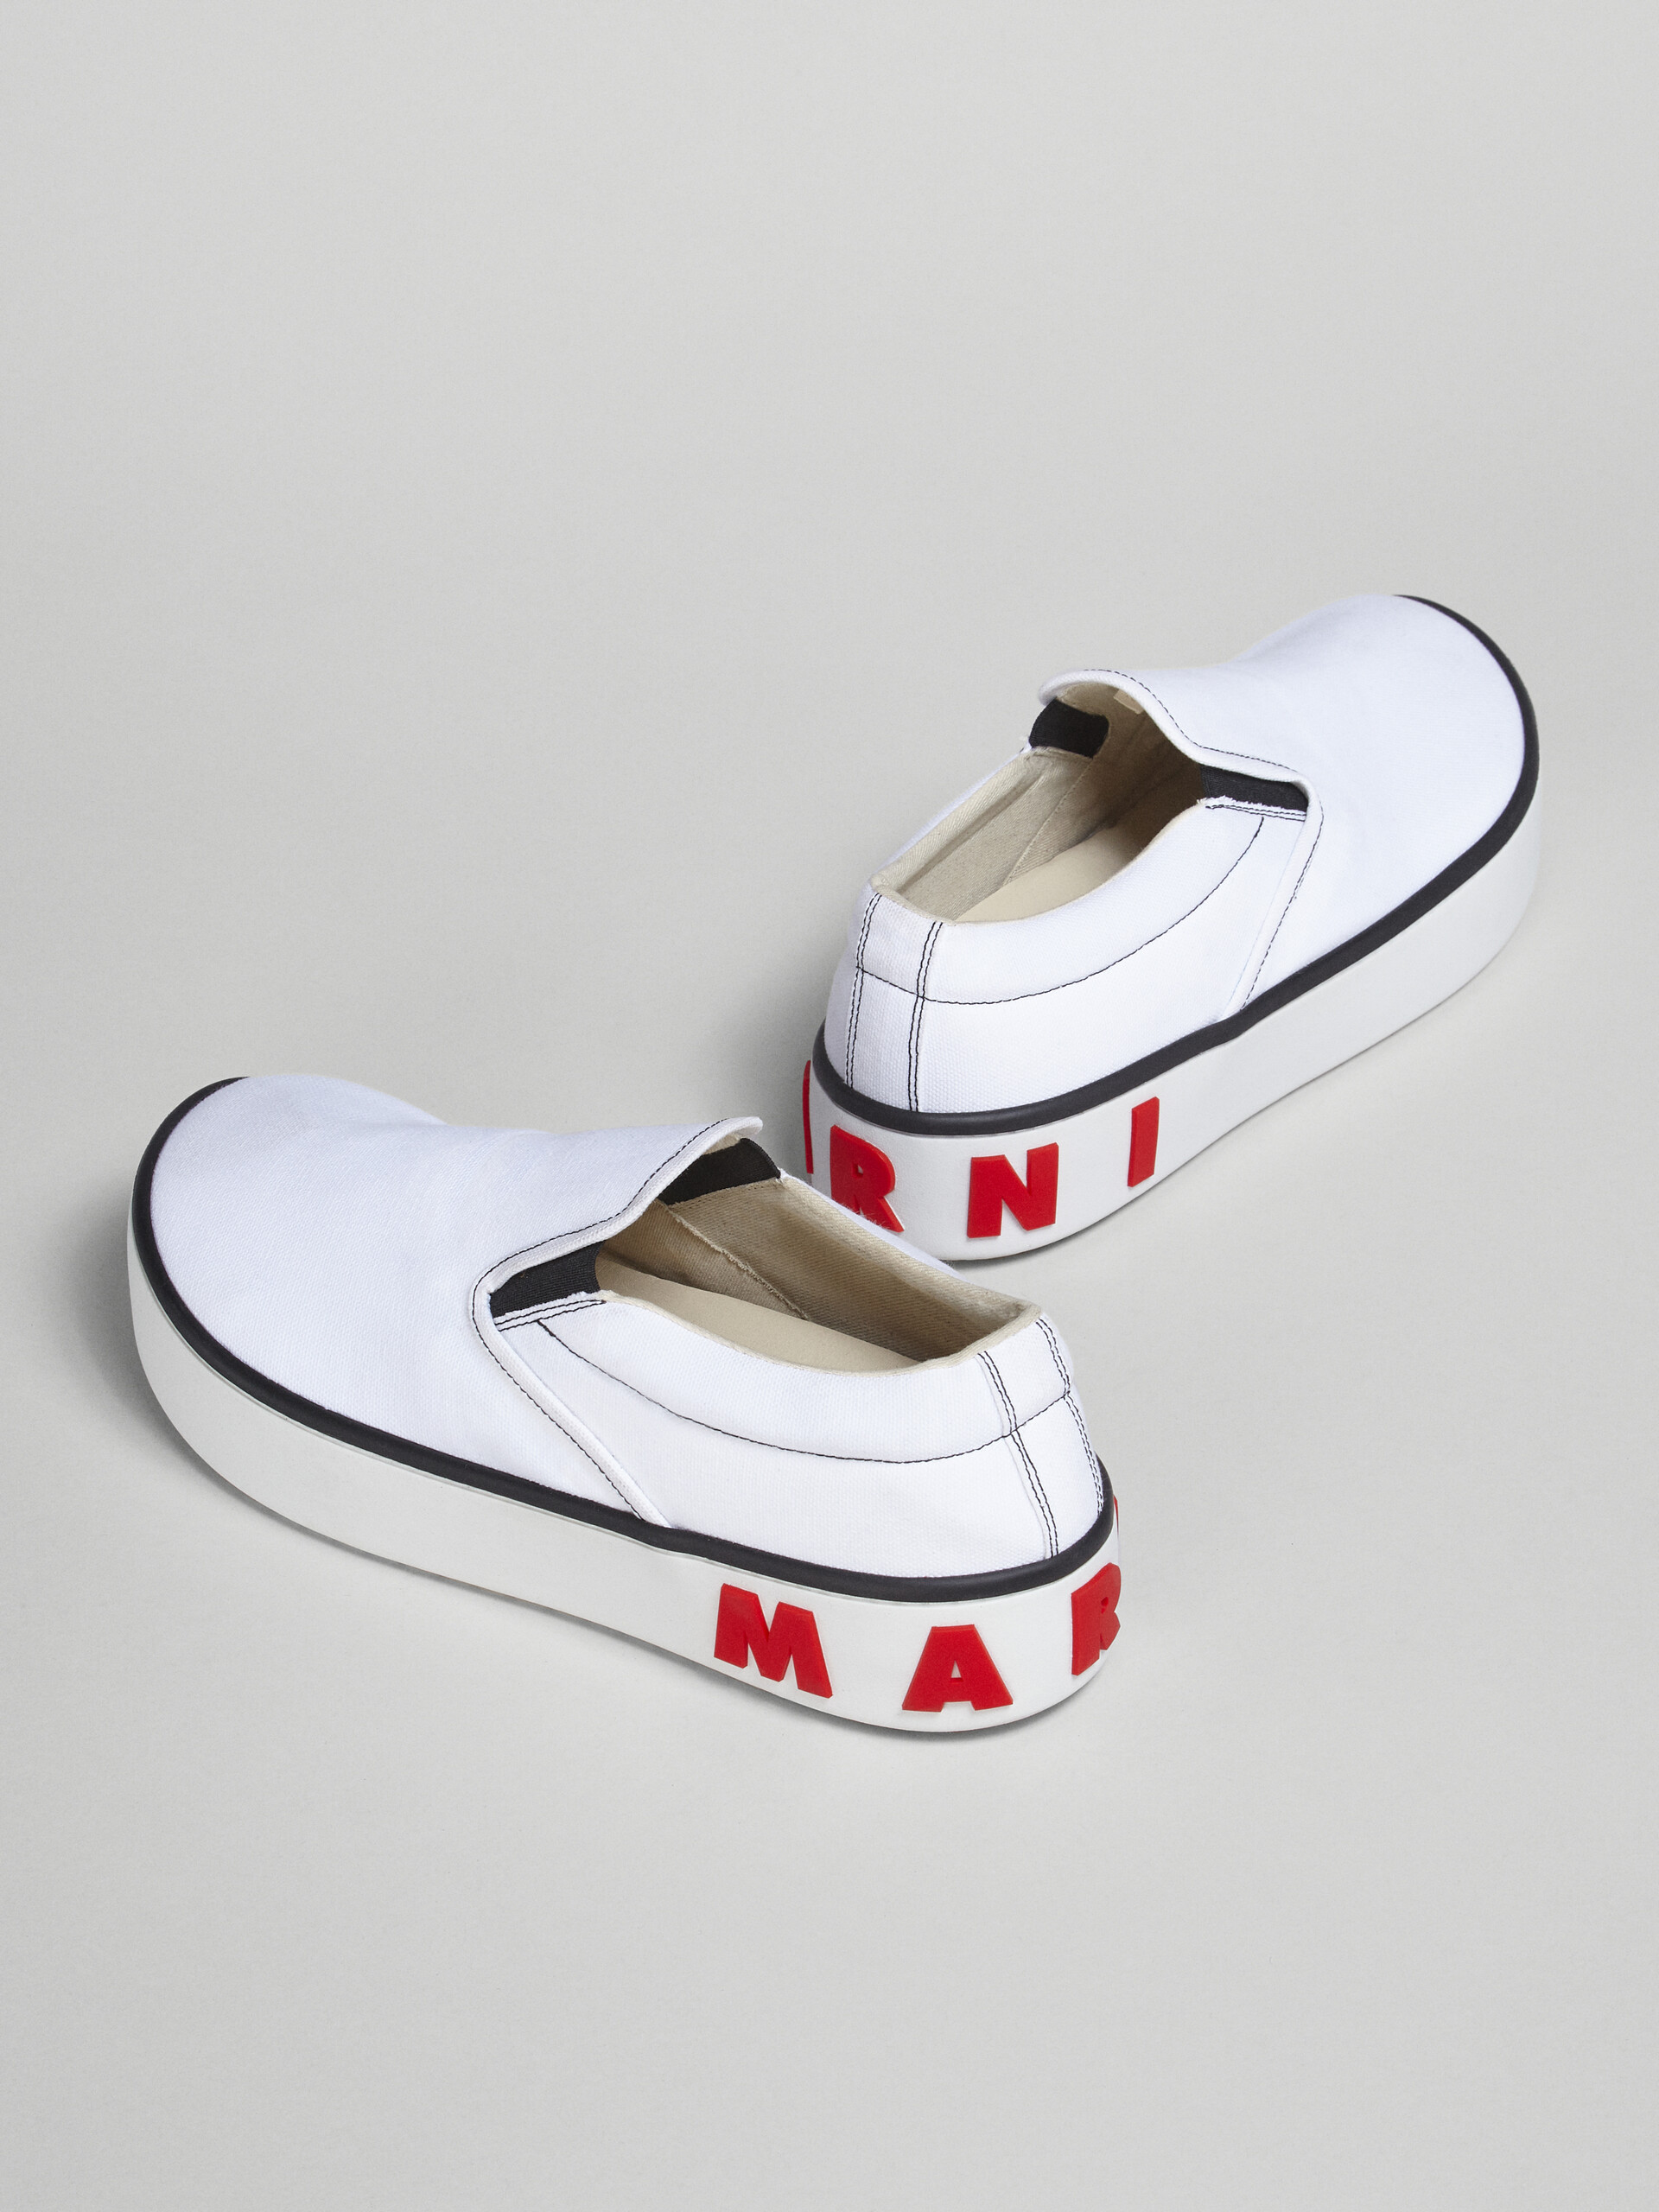 Canvas slip-on PAW sneaker with back maxi logo - Sneakers - Image 4